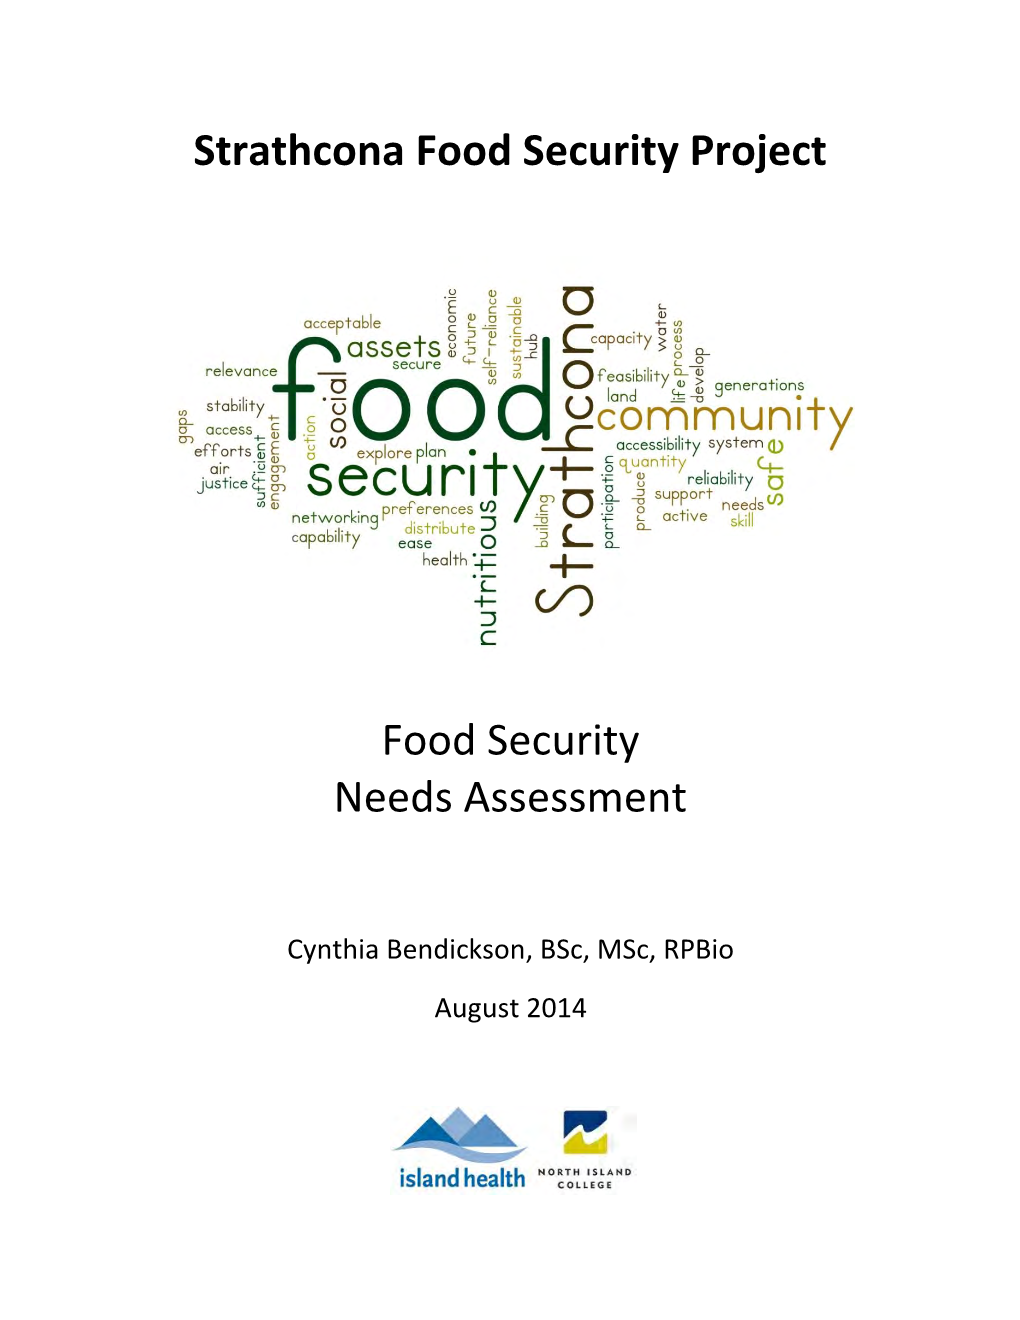 Strathcona Food Security Needs Assessment